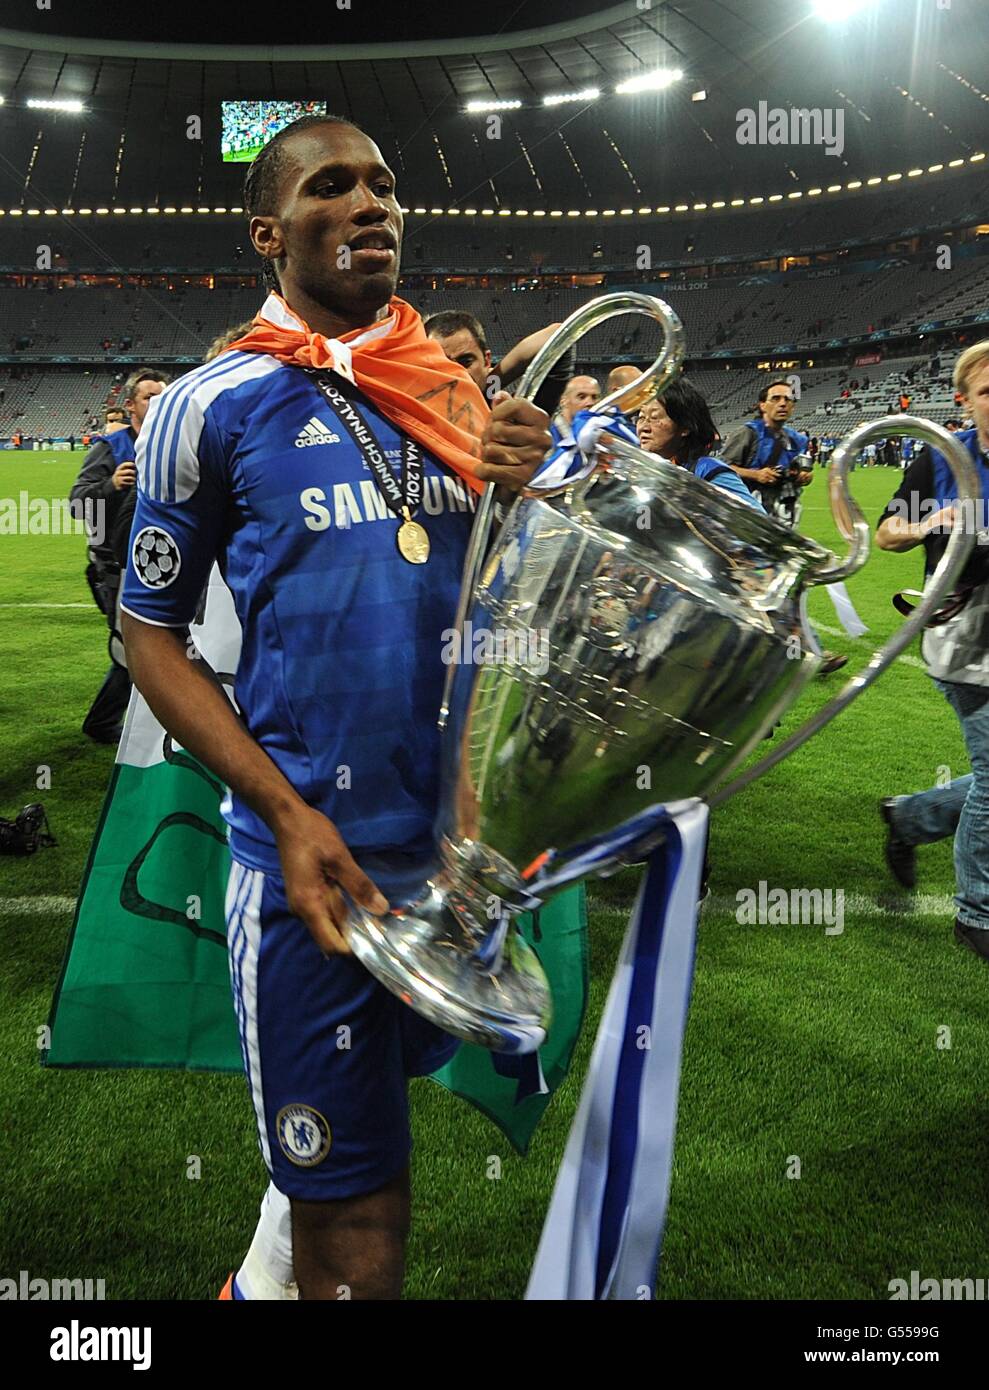 Chelsea S Didier Drogba Celebrates With The Uefa Champions League Trophy After The Final Whistle